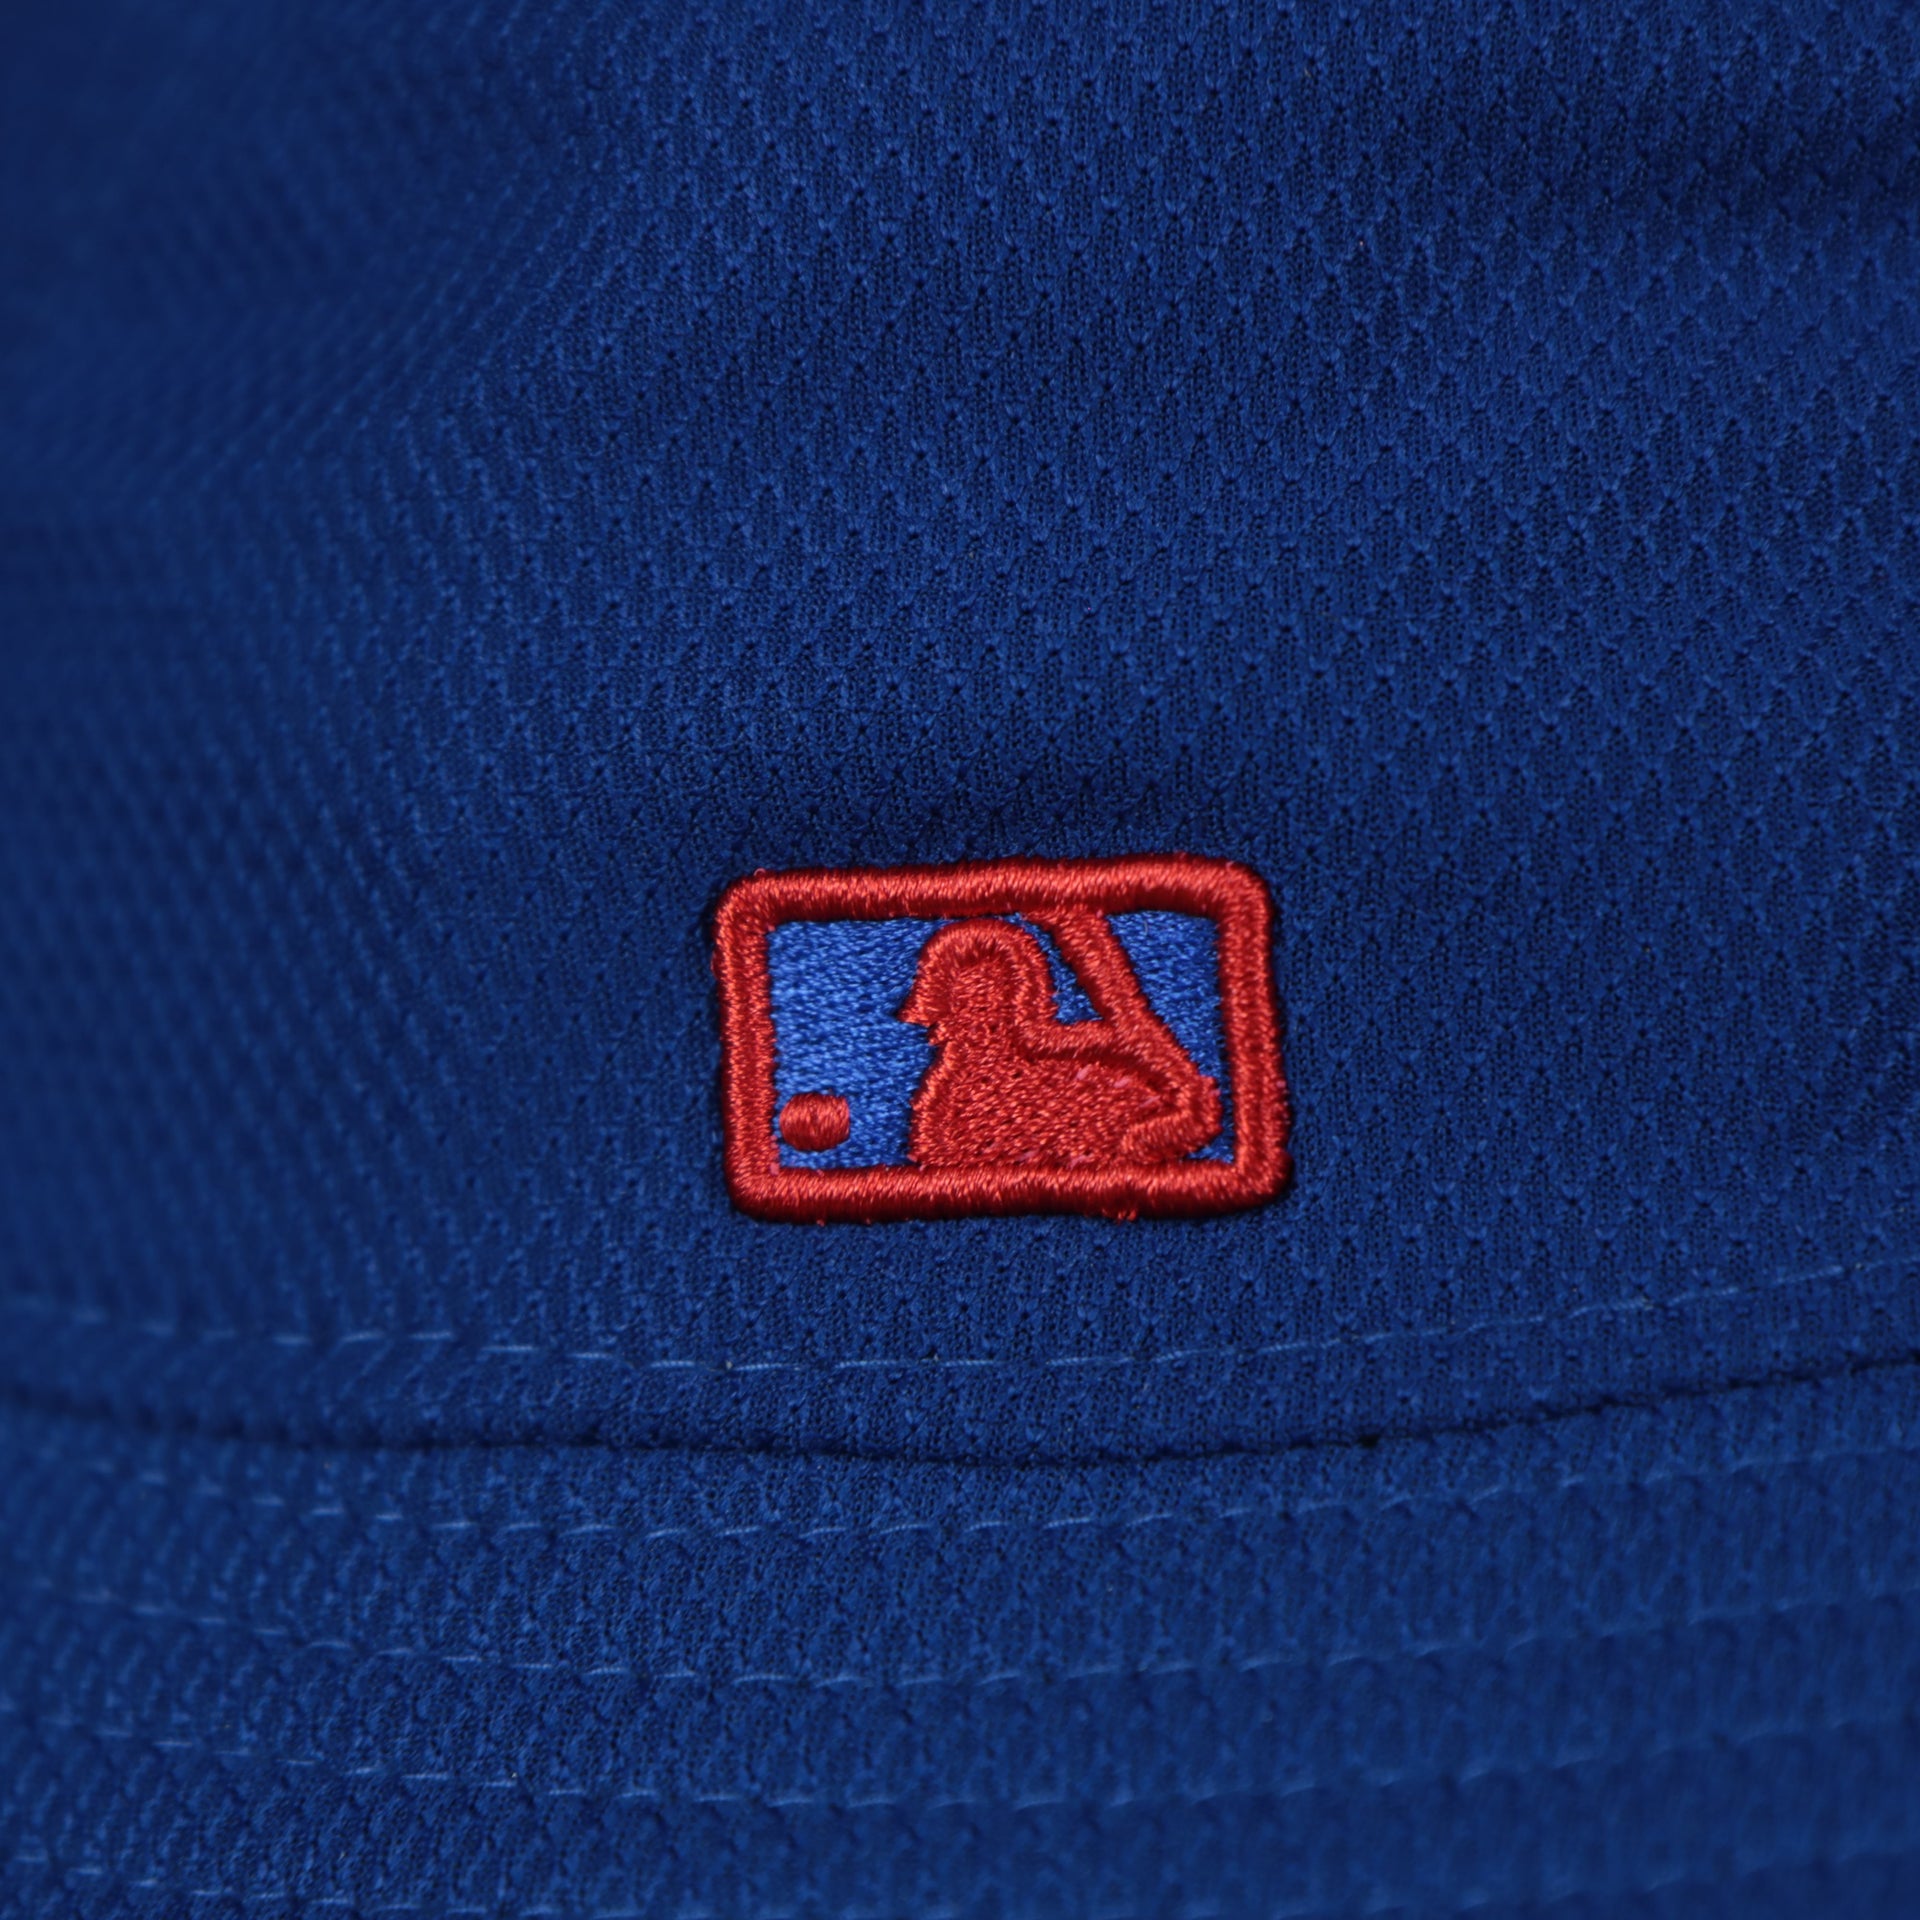 A close up of the MLB Batterman logo on the Chicago Cubs MLB 2022 Spring Training Onfield Bucket Hat